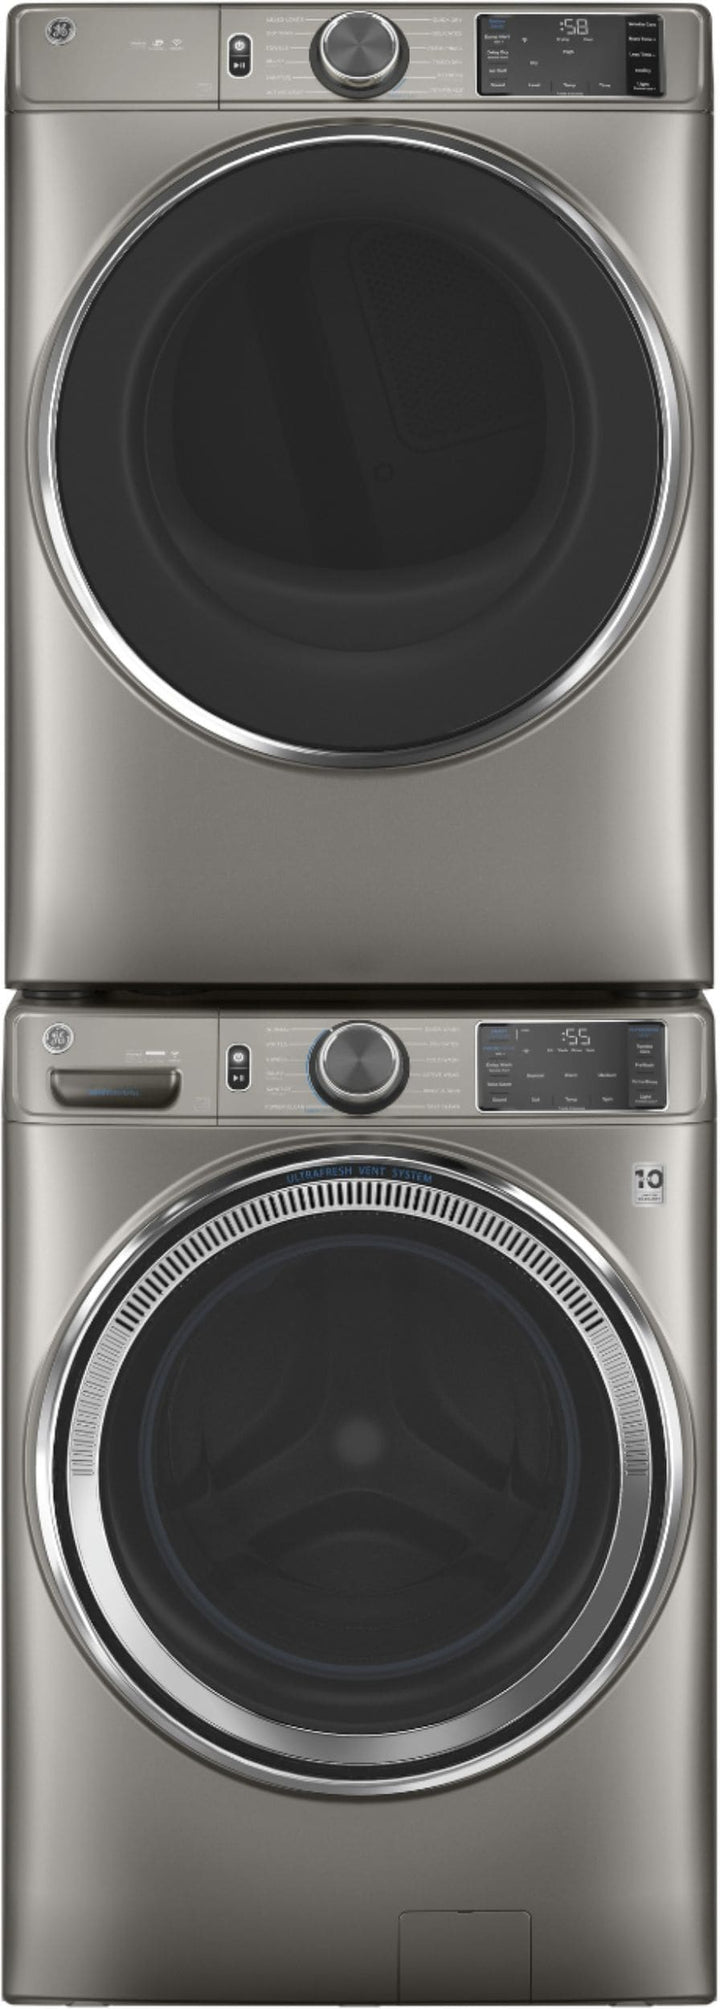 GE - 7.8 Cu. Ft. 12-Cycle Electric Dryer with Steam - Satin nickel_3